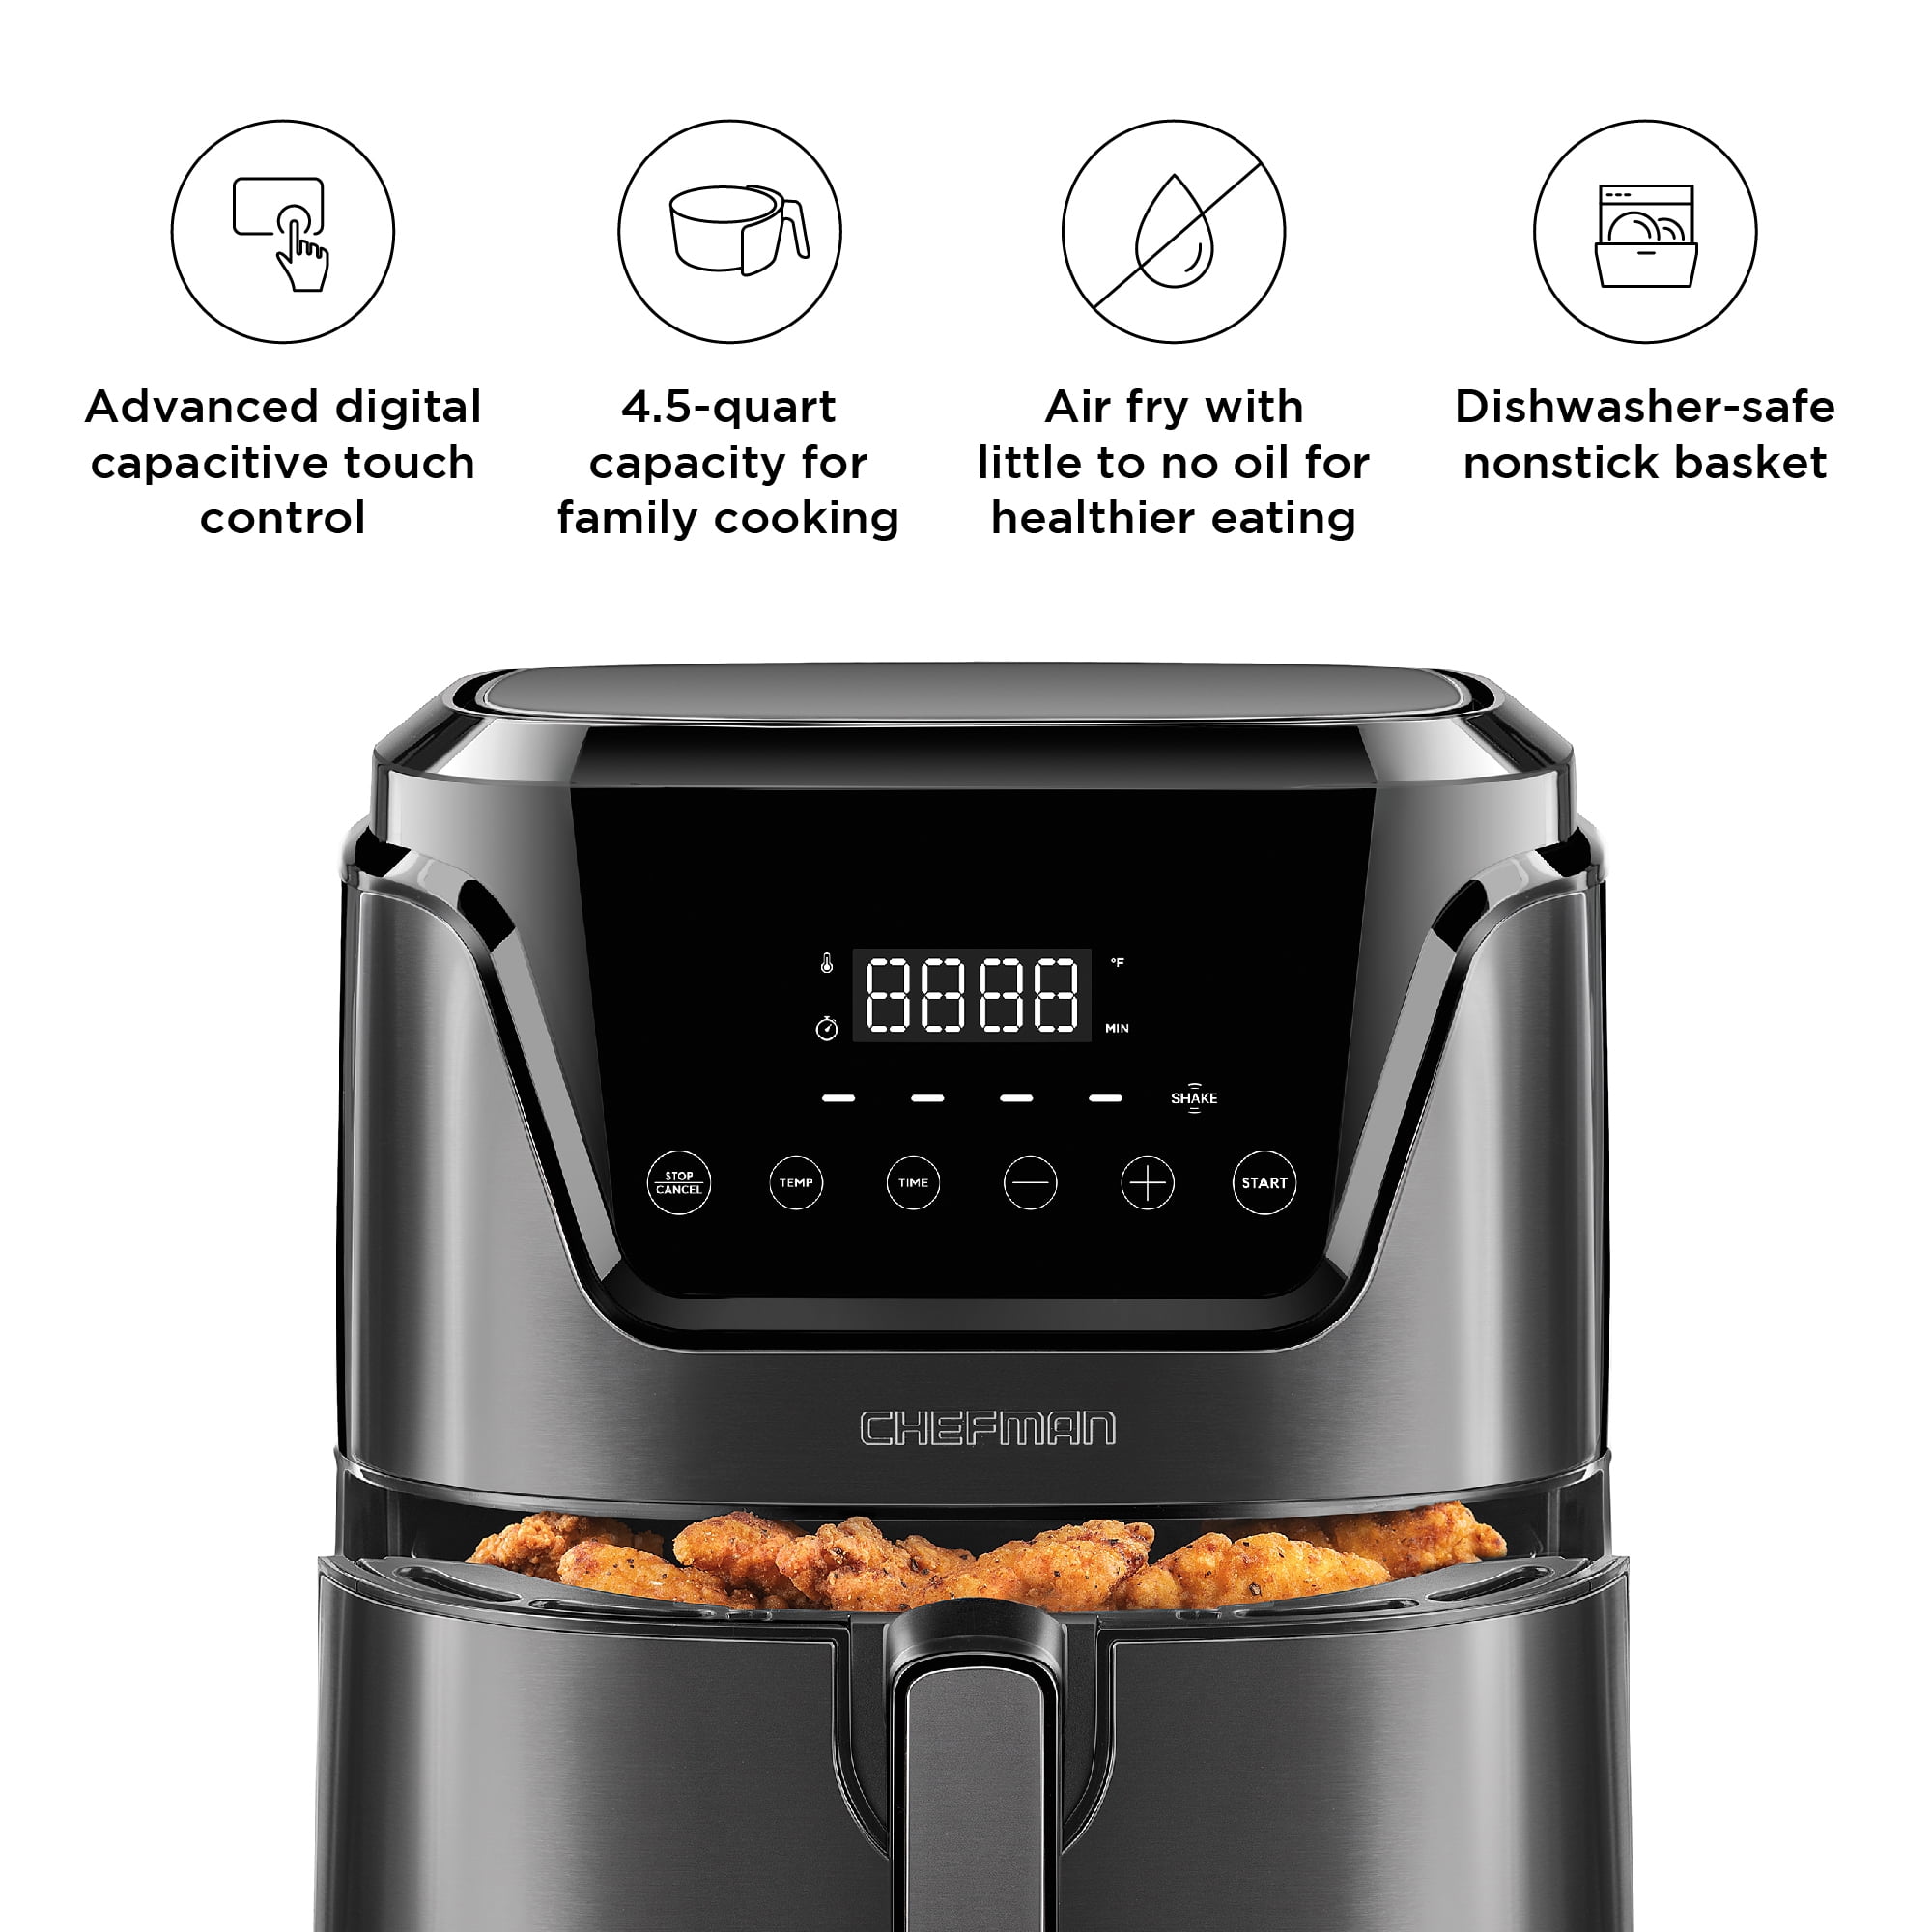  Chefman Digital Air Fryer, Large 5 Qt Family Size, One Touch  Digital Control Presets, French Fries, Chicken, Meat, Fish, Nonstick  Dishwasher-Safe Parts, Automatic Shutoff, Black : Home & Kitchen